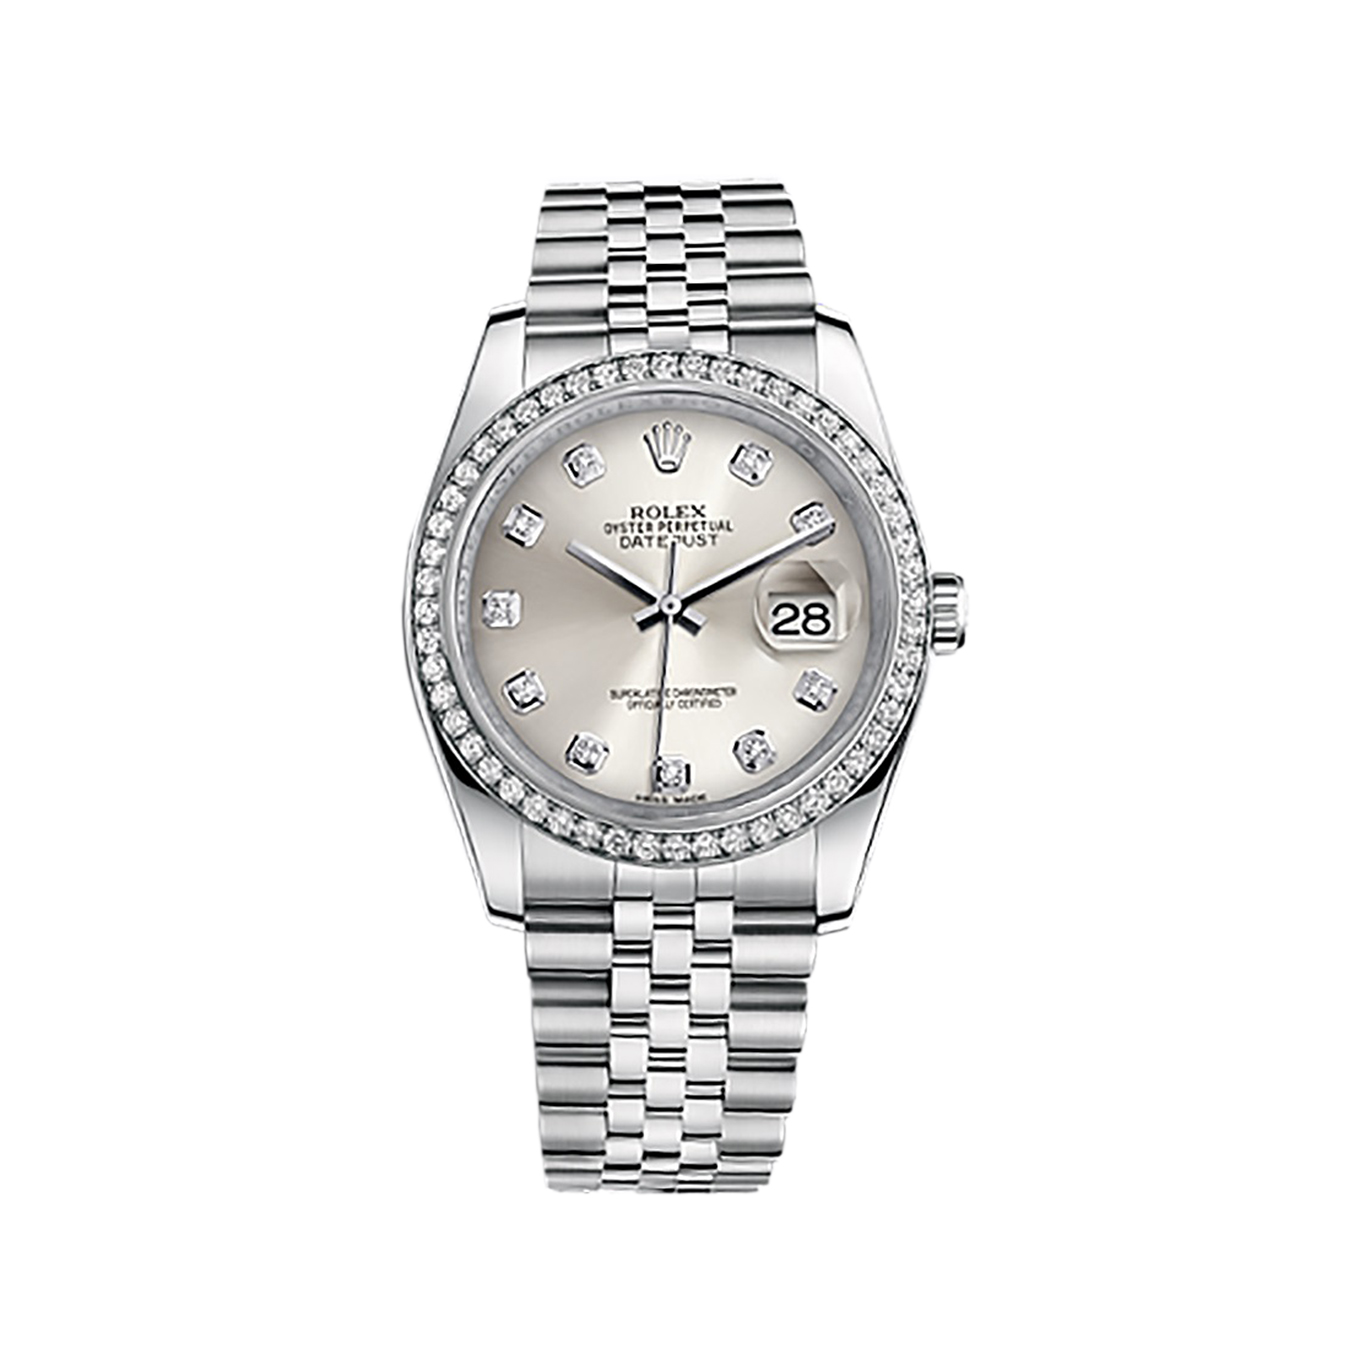 Datejust 36 116244 White Gold & Stainless Steel Watch (Silver Set with Diamonds)